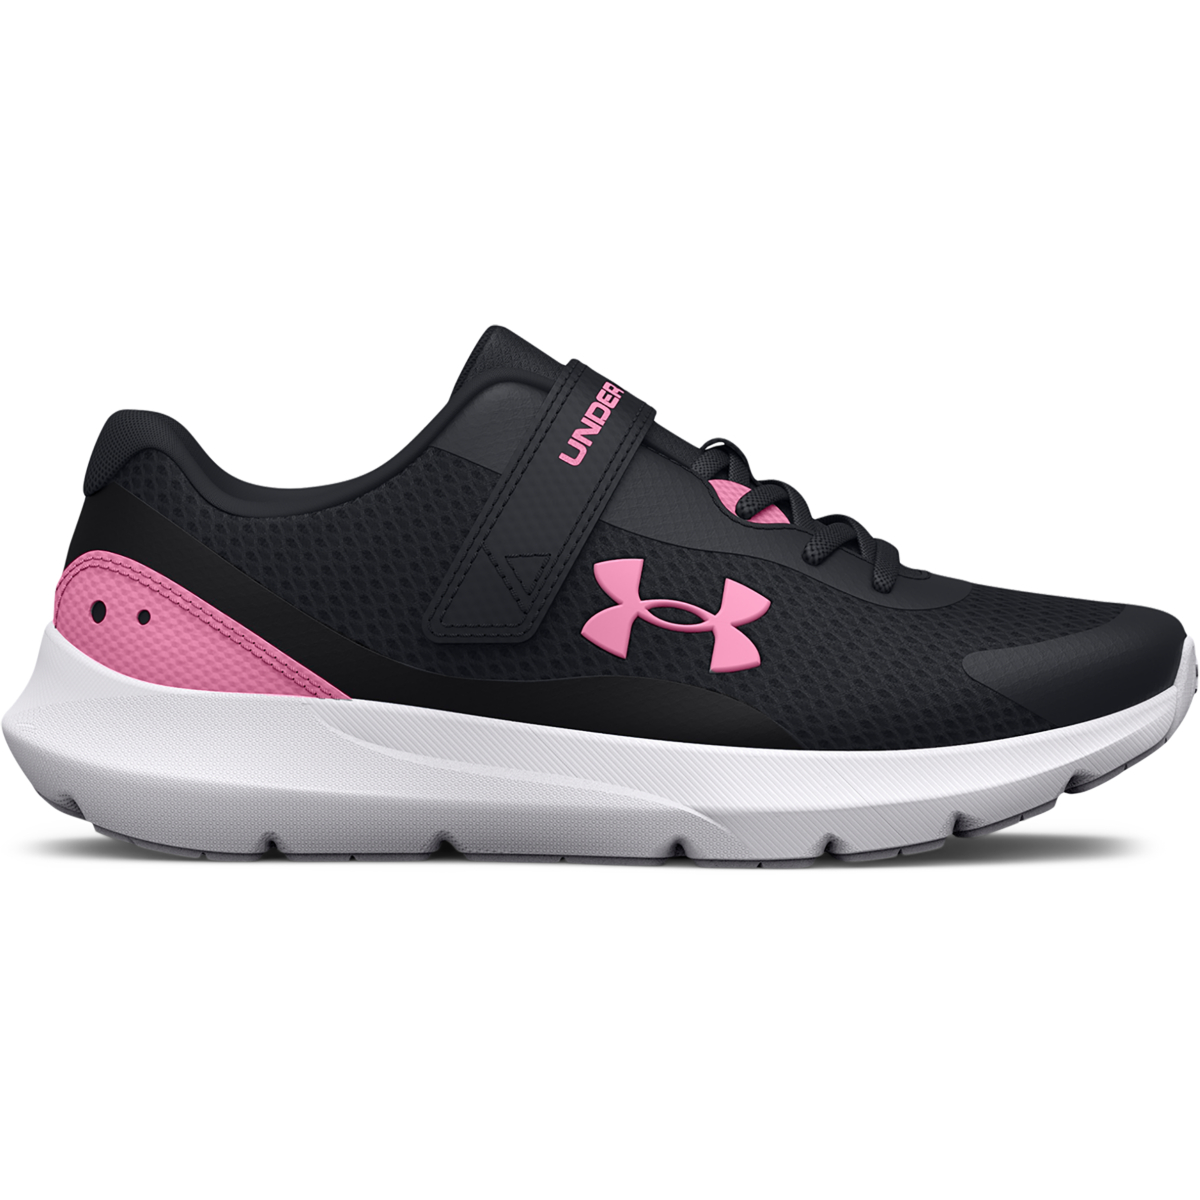 Under Armour - 3025014 Girls' Pre-School UA Surge 3 AC Running Shoes - 001/71P7 Παιδικά > Παπούτσια > Αθλητικά > Παπούτσι Low Cut